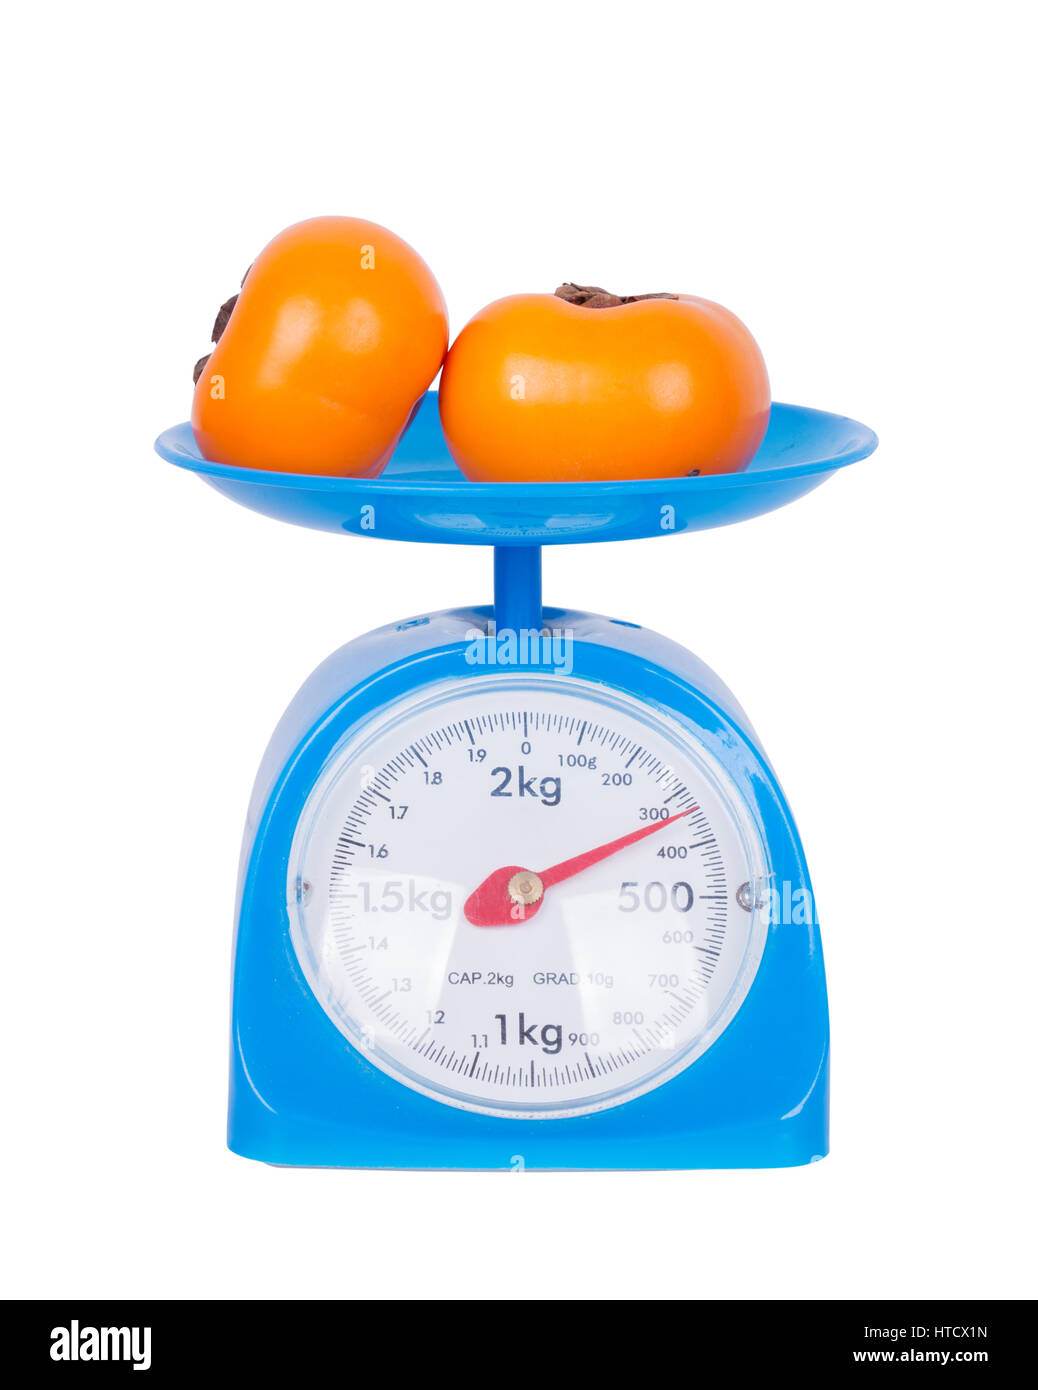 https://c8.alamy.com/comp/HTCX1N/persimmon-on-kitchen-scale-isolated-on-white-background-with-clipping-HTCX1N.jpg